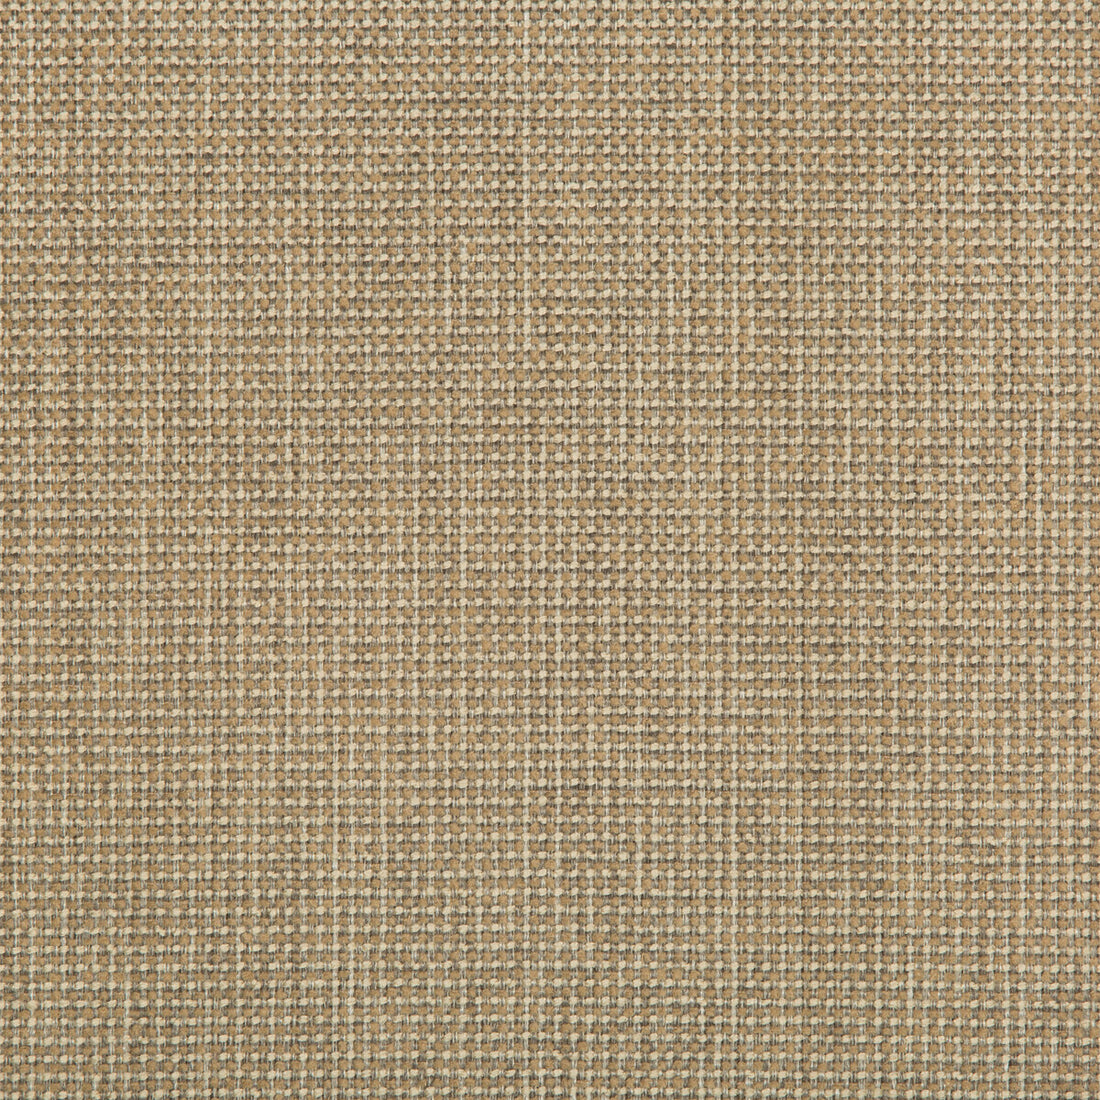 Burr fabric in flax color - pattern 35745.106.0 - by Kravet Contract in the Value Kravetarmor collection